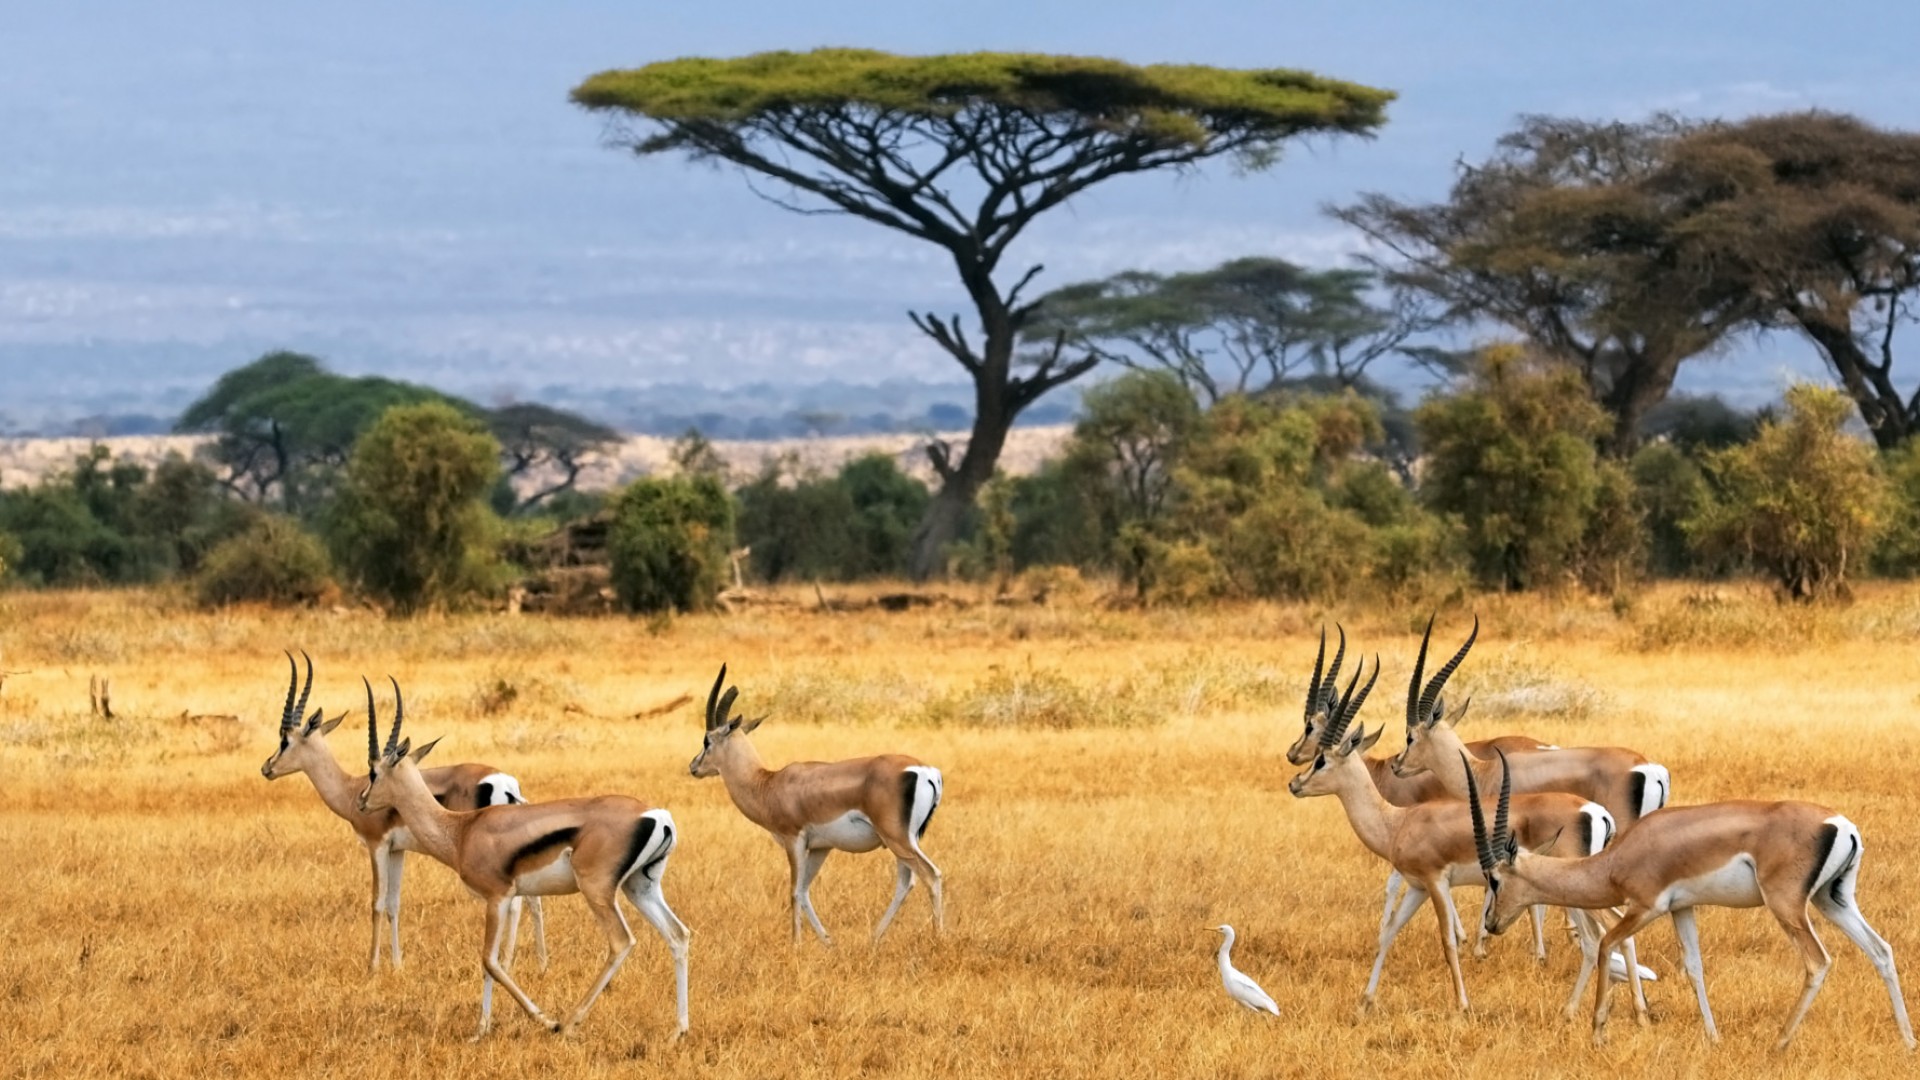 Group of gazelles running through a field of tall grass in front of a single tree on a safari